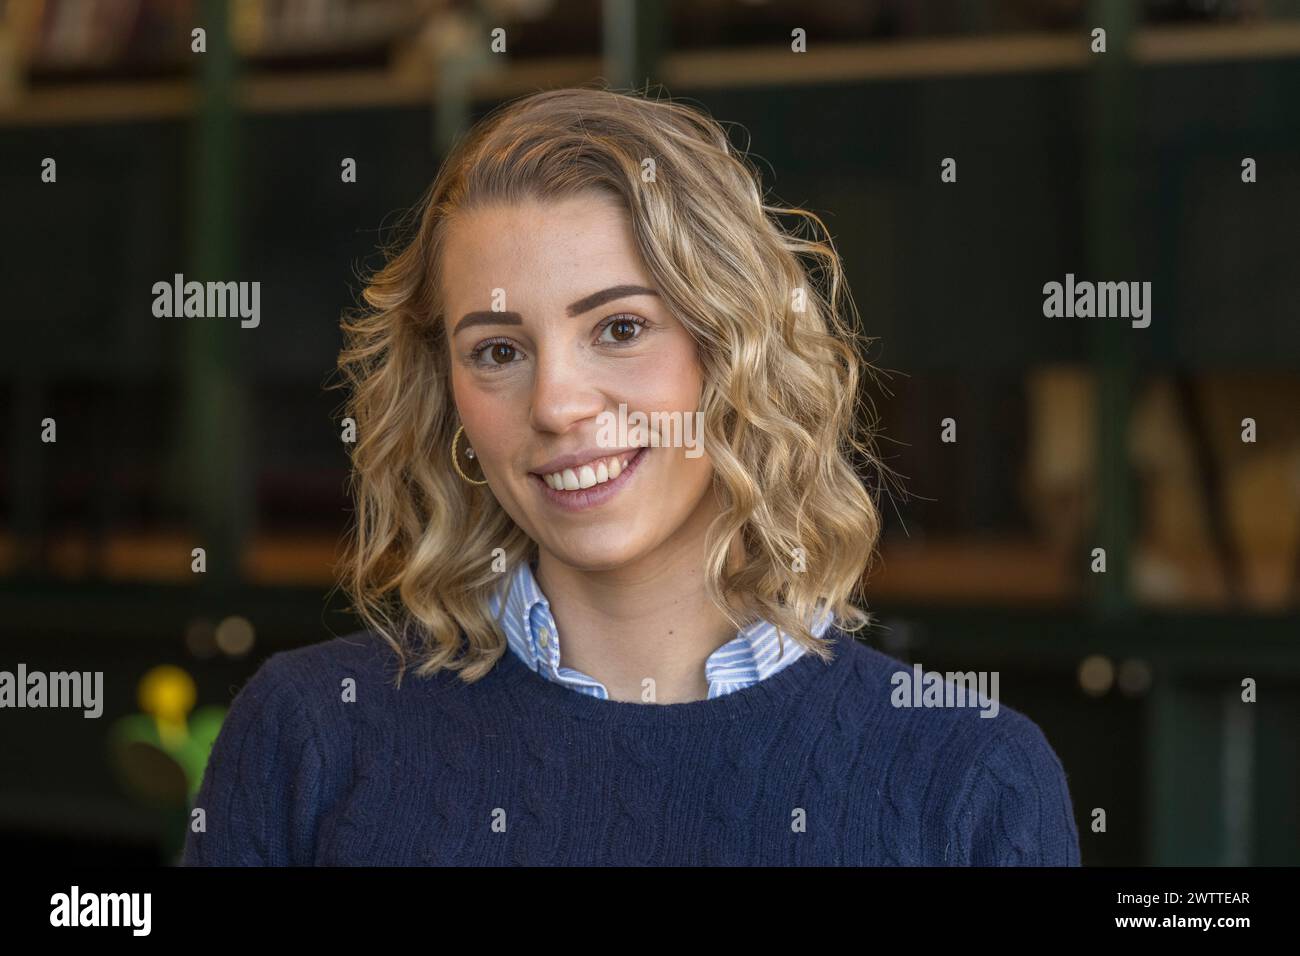 Young woman smiling in a cozy library setting. Stock Photo